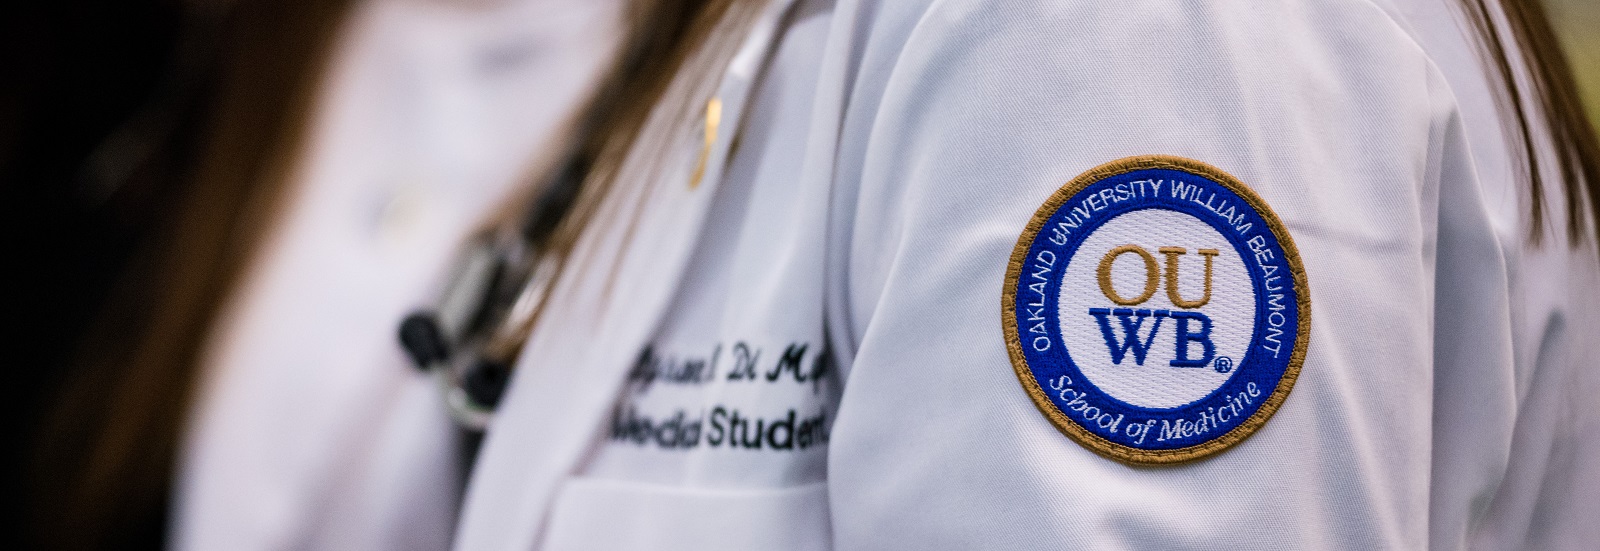 A close-up photo of a white coat with the OUWB patch in focus.